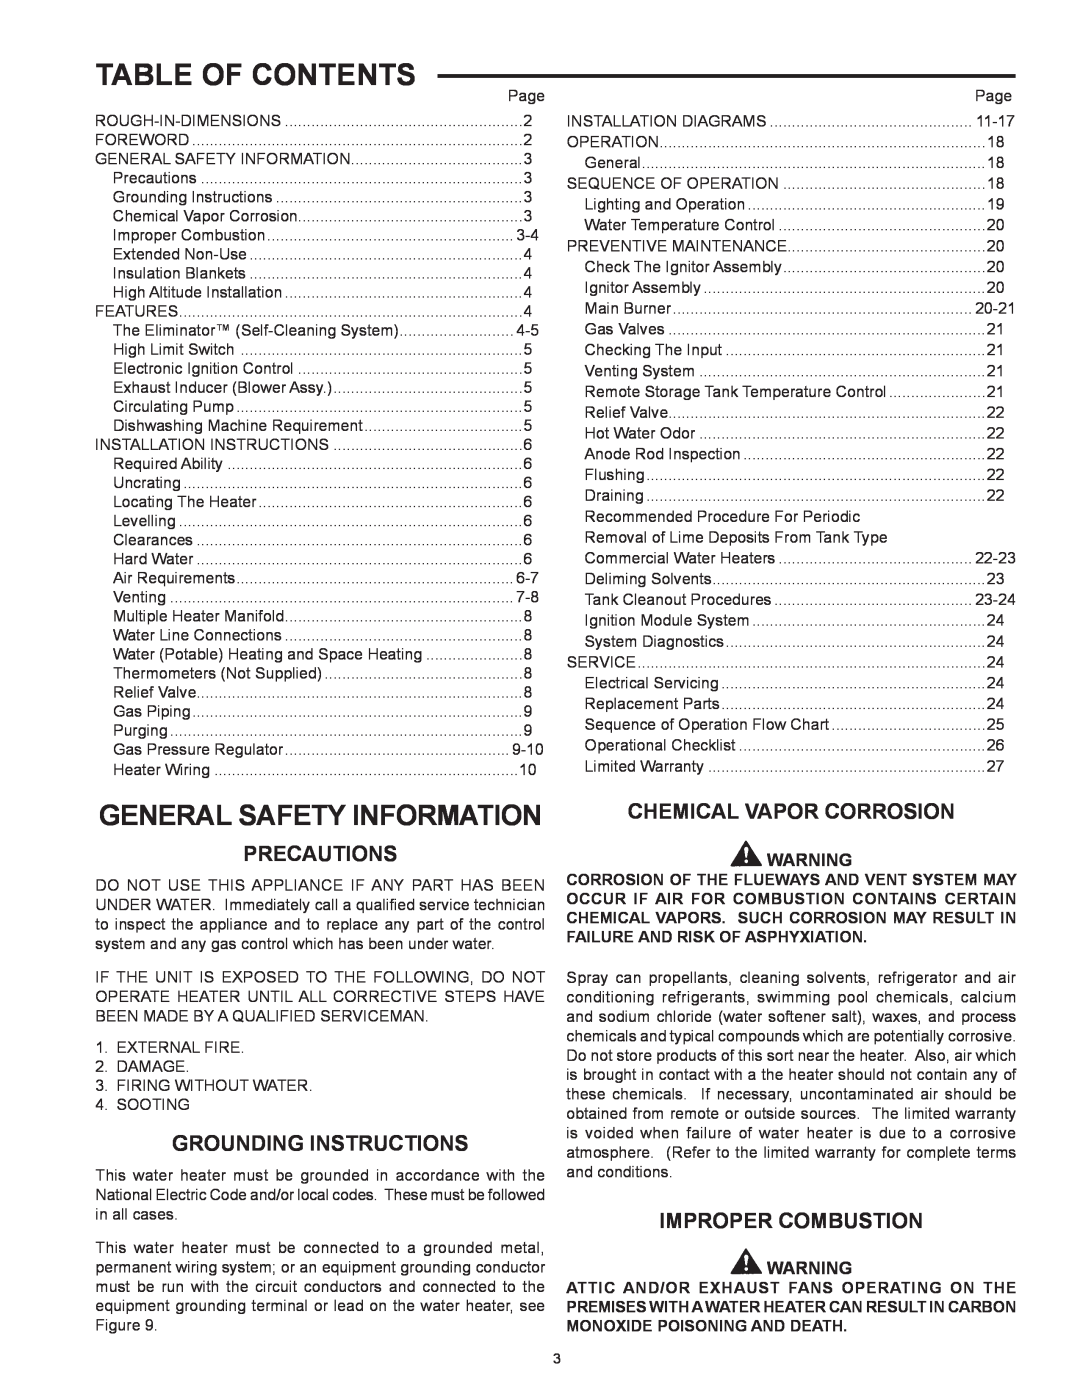 Lochinvar CG150 Table Of Contents, General Safety Information, Precautions, Grounding Instructions, Improper Combustion 